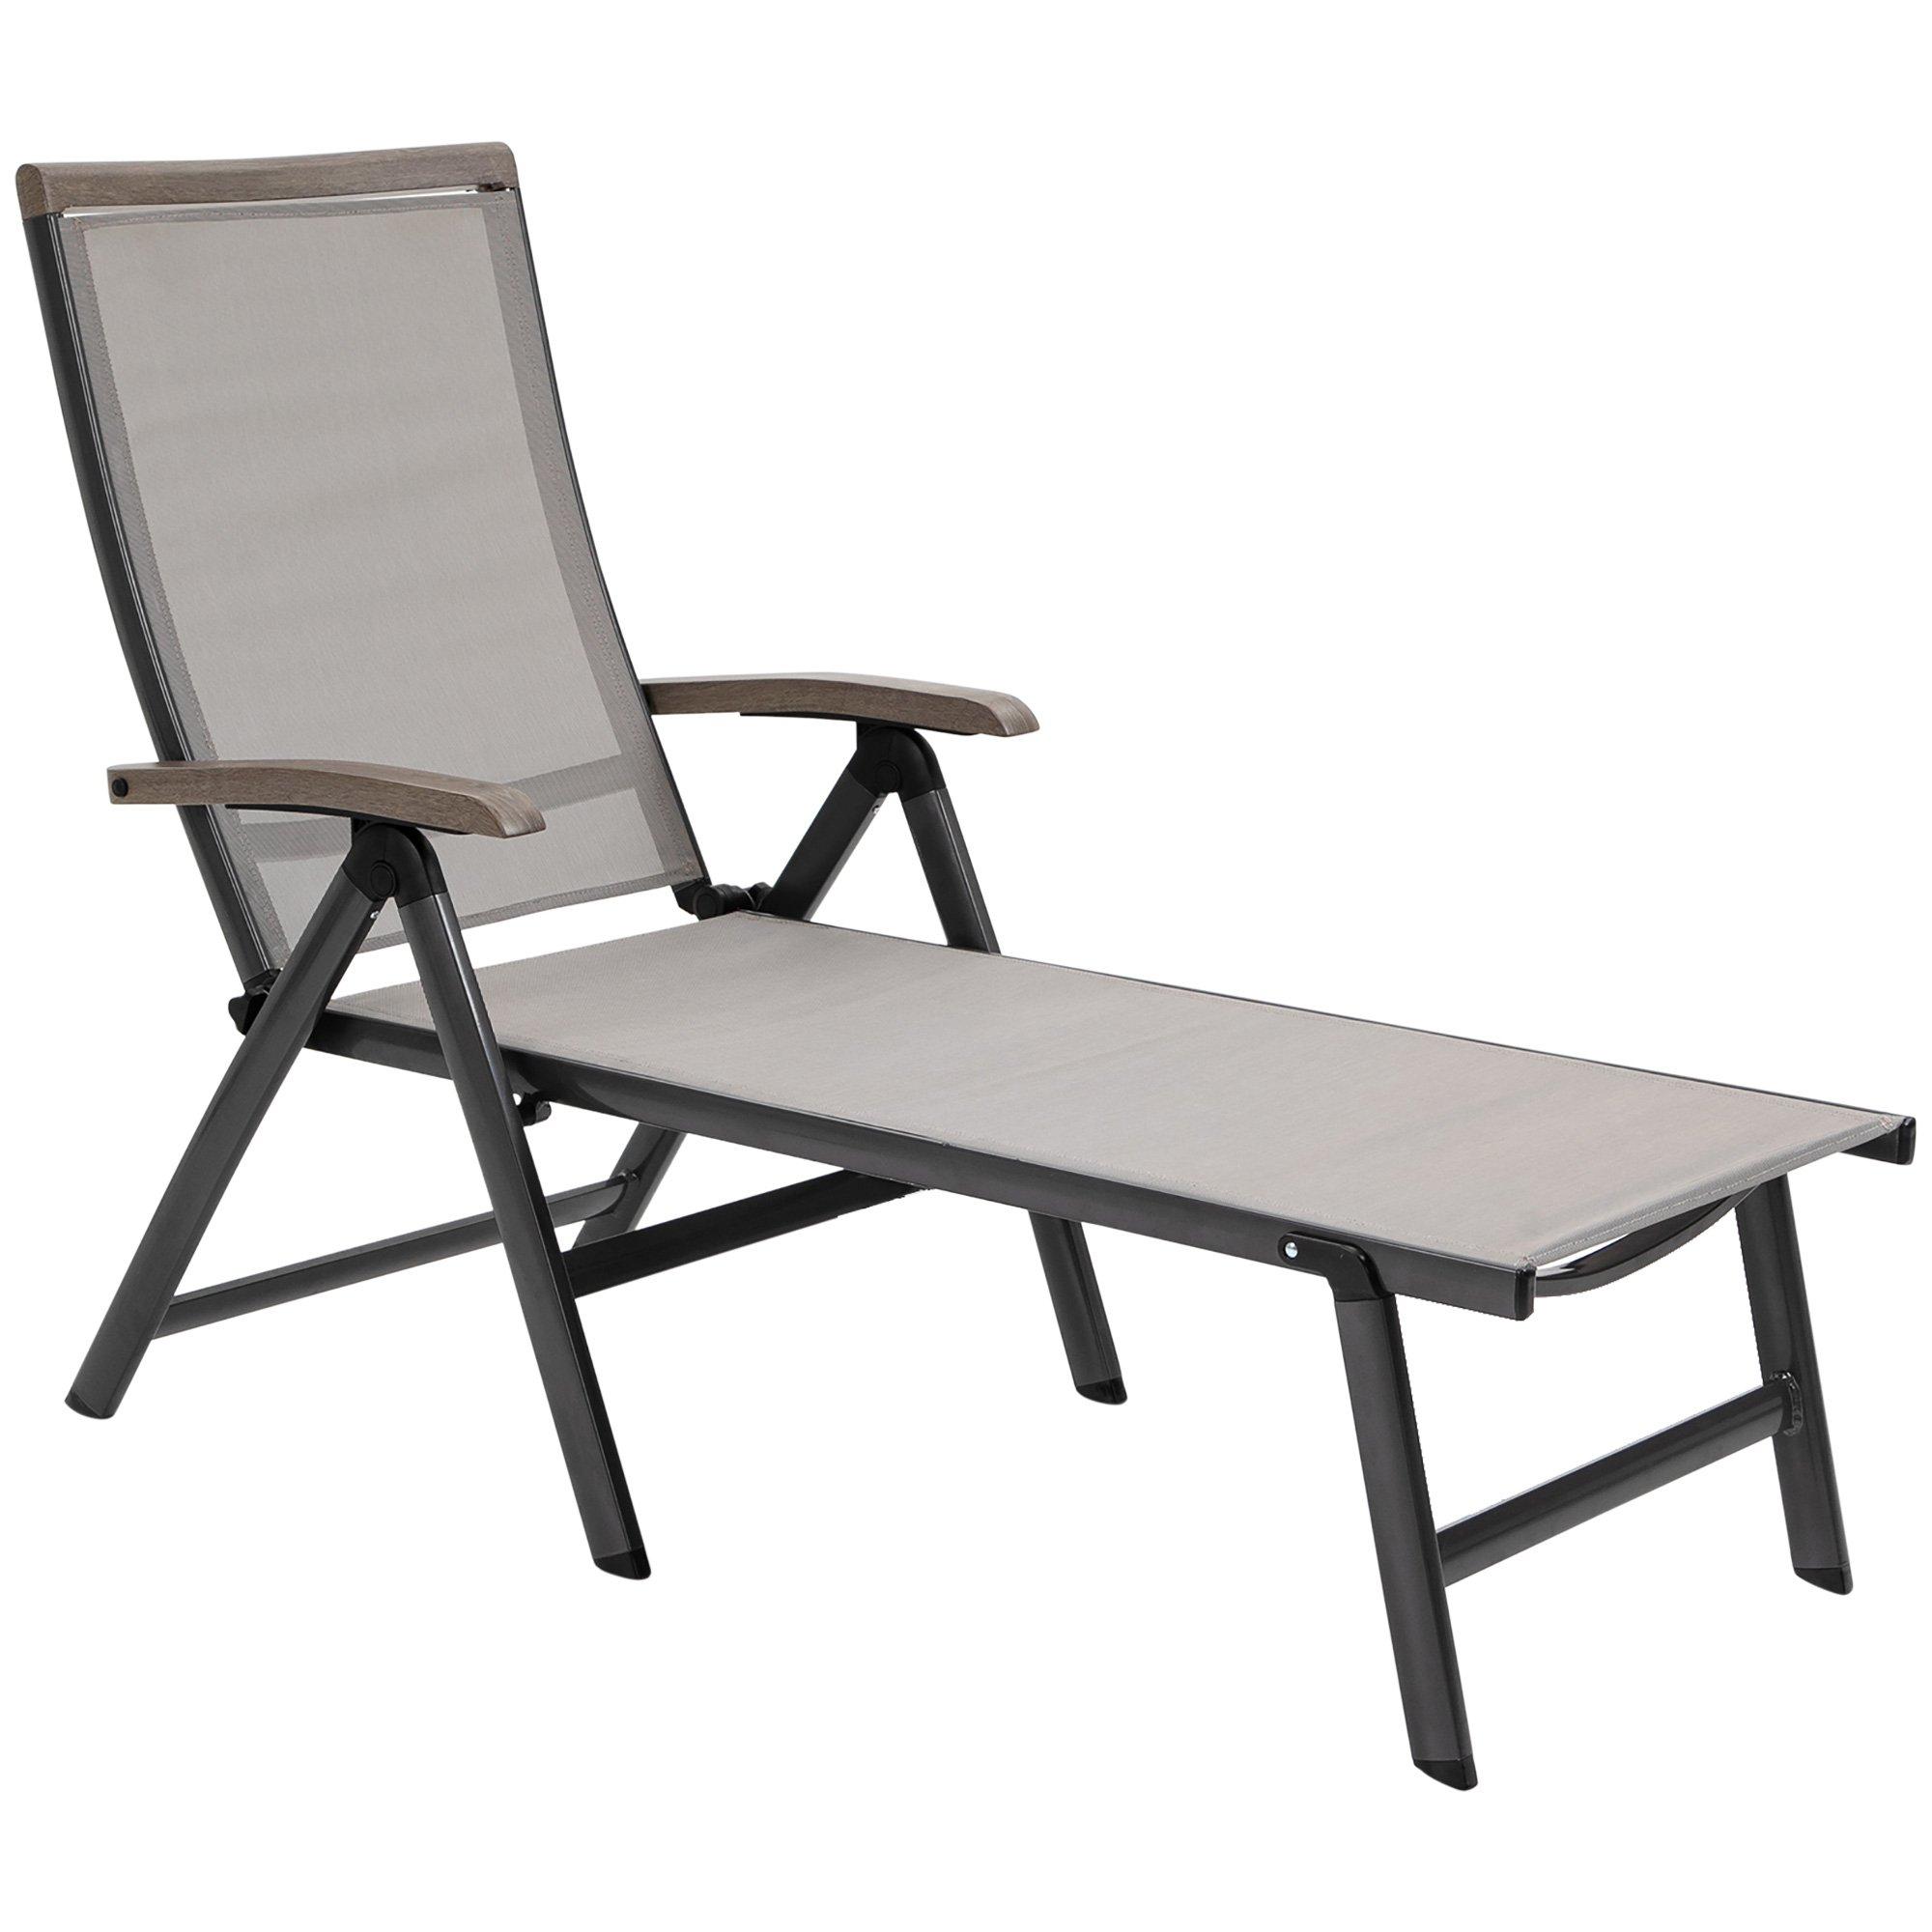 Outdoor Folding Sun Lounger with Adjustable Backrest and Aluminium